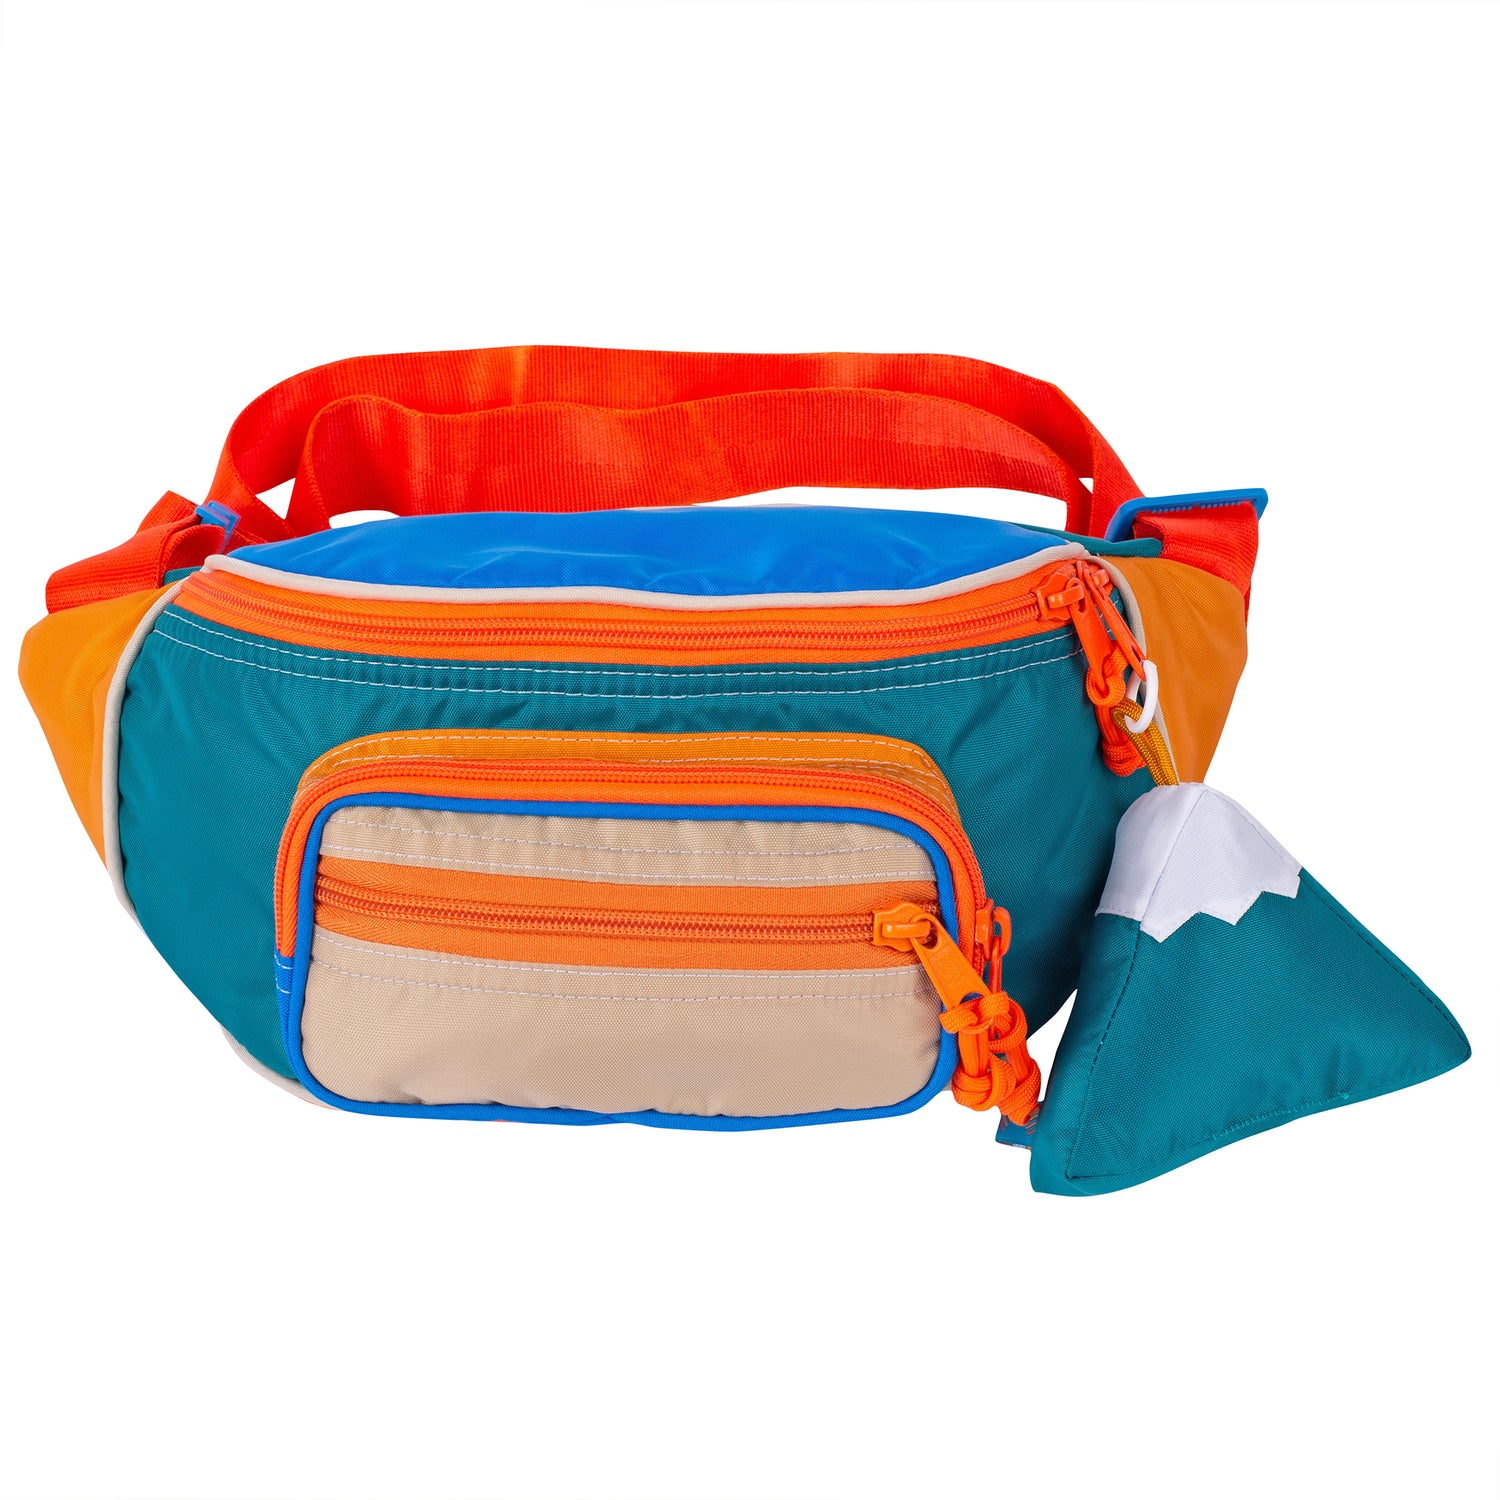 Large fanny pack sling in multiple colors with a mountain design keychain